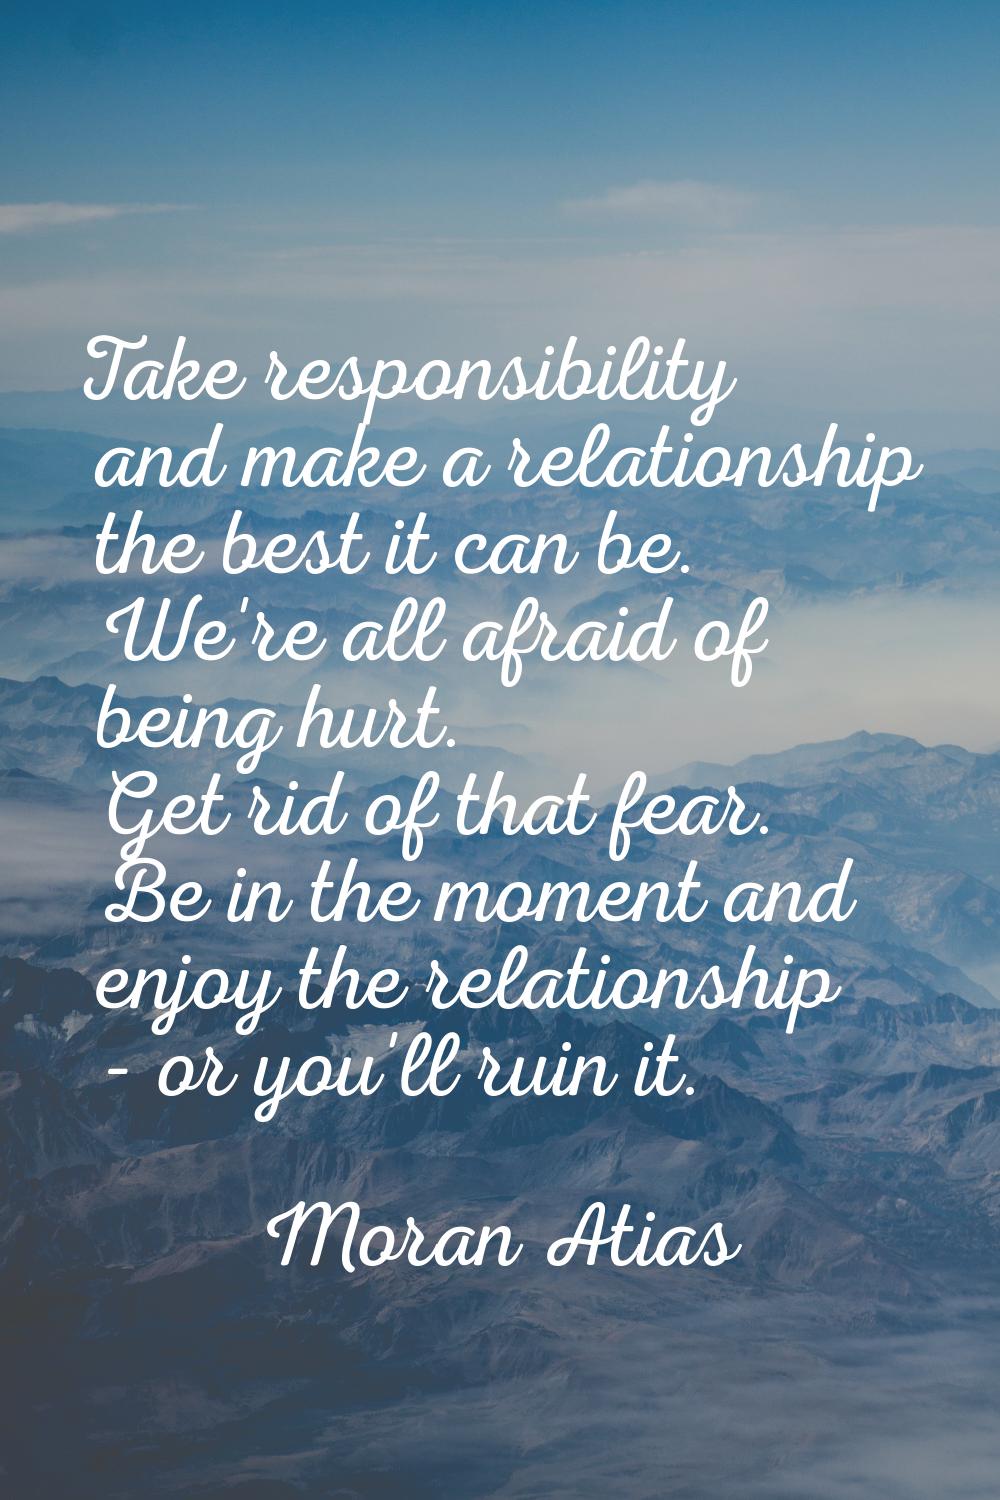 Take responsibility and make a relationship the best it can be. We're all afraid of being hurt. Get